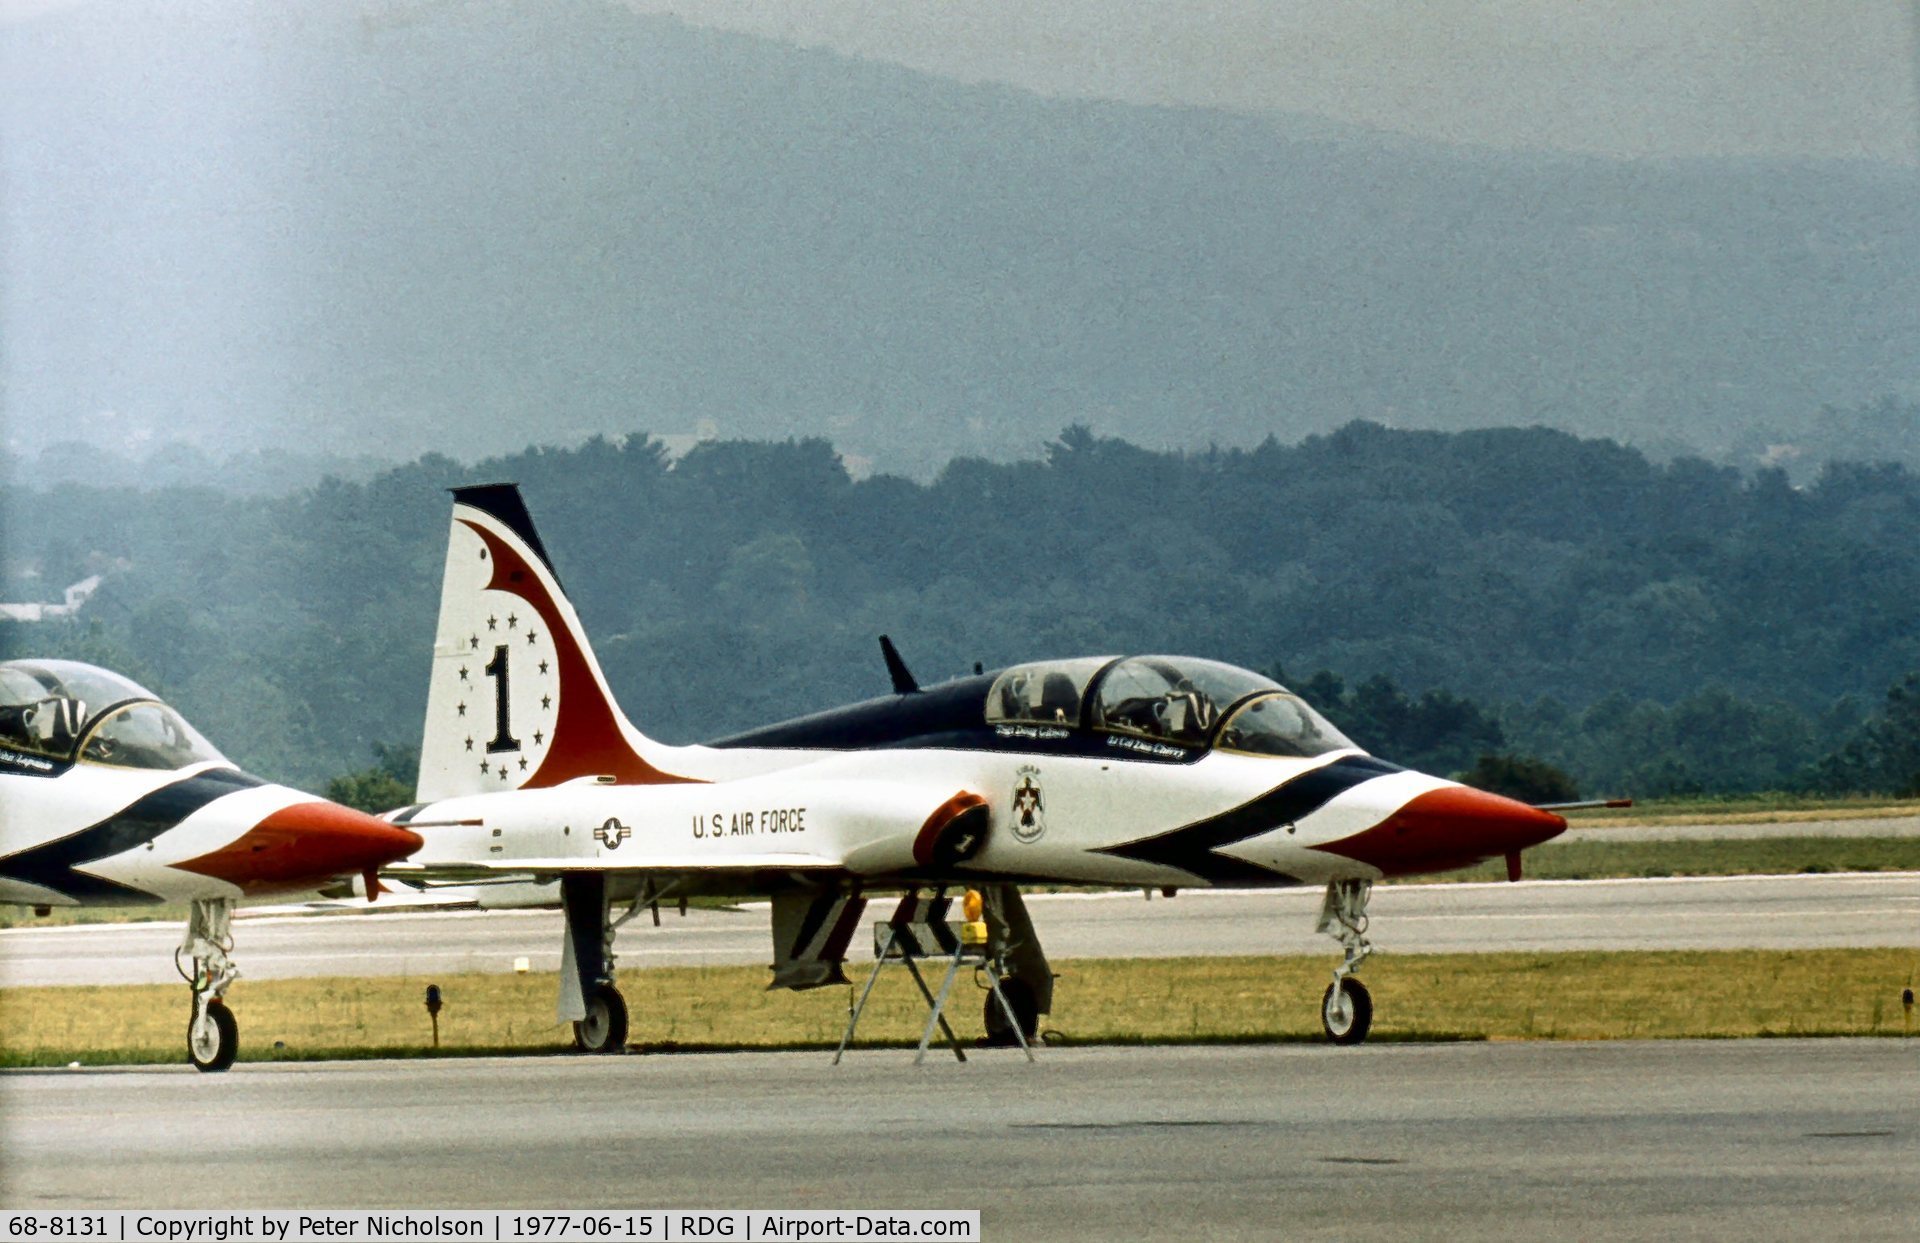 68-8131, 1968 Northrop T-38A Talon C/N T.6136, Lead aircraft of the Thunderbirds aerobatic display team at the 1977 Reading Airshow.